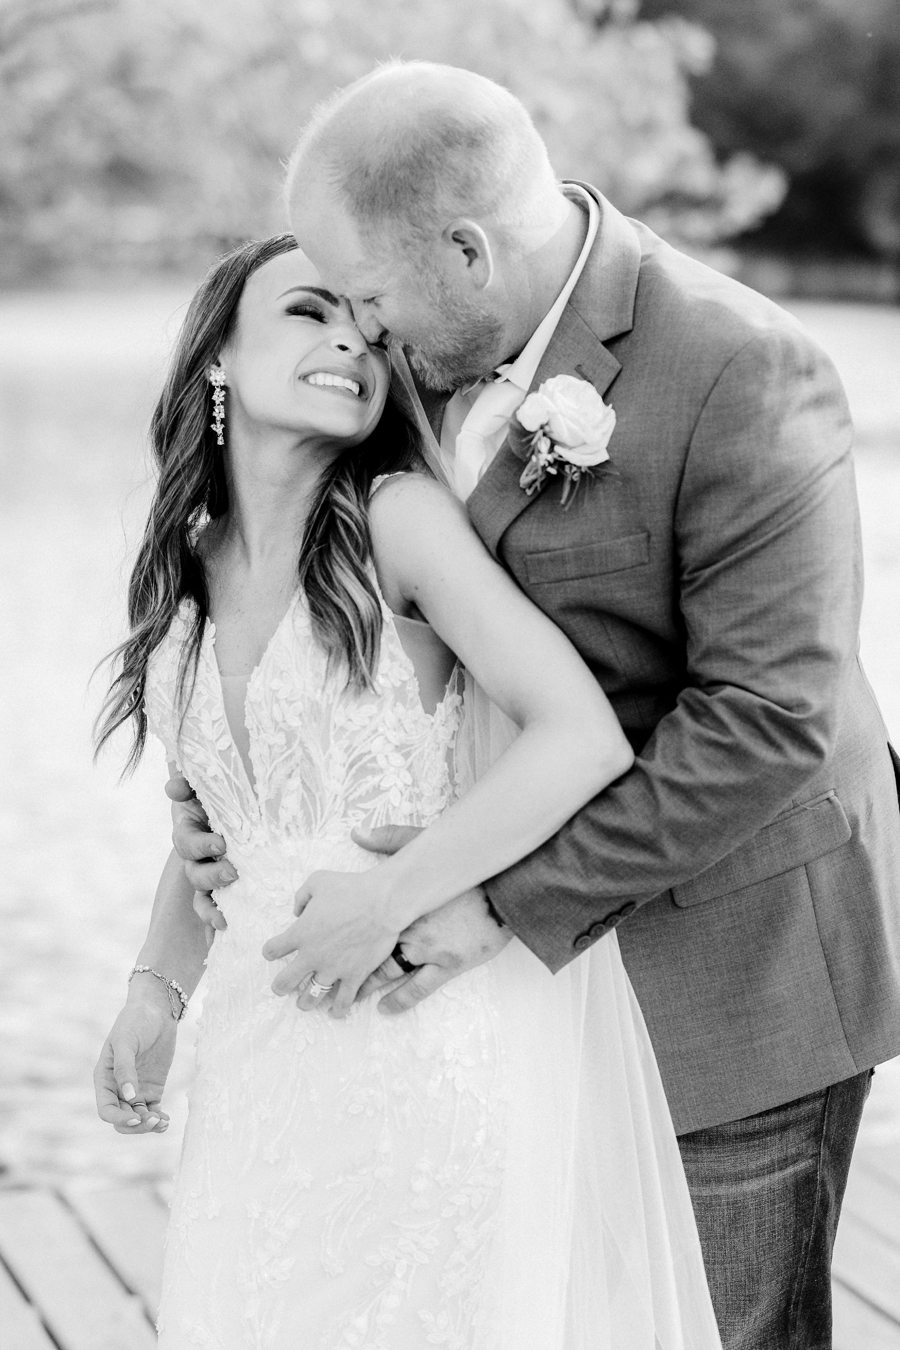 A Wildcliff Wedding in Blackwater, Missouri by Columbia, MO photographer Love Tree Studios.